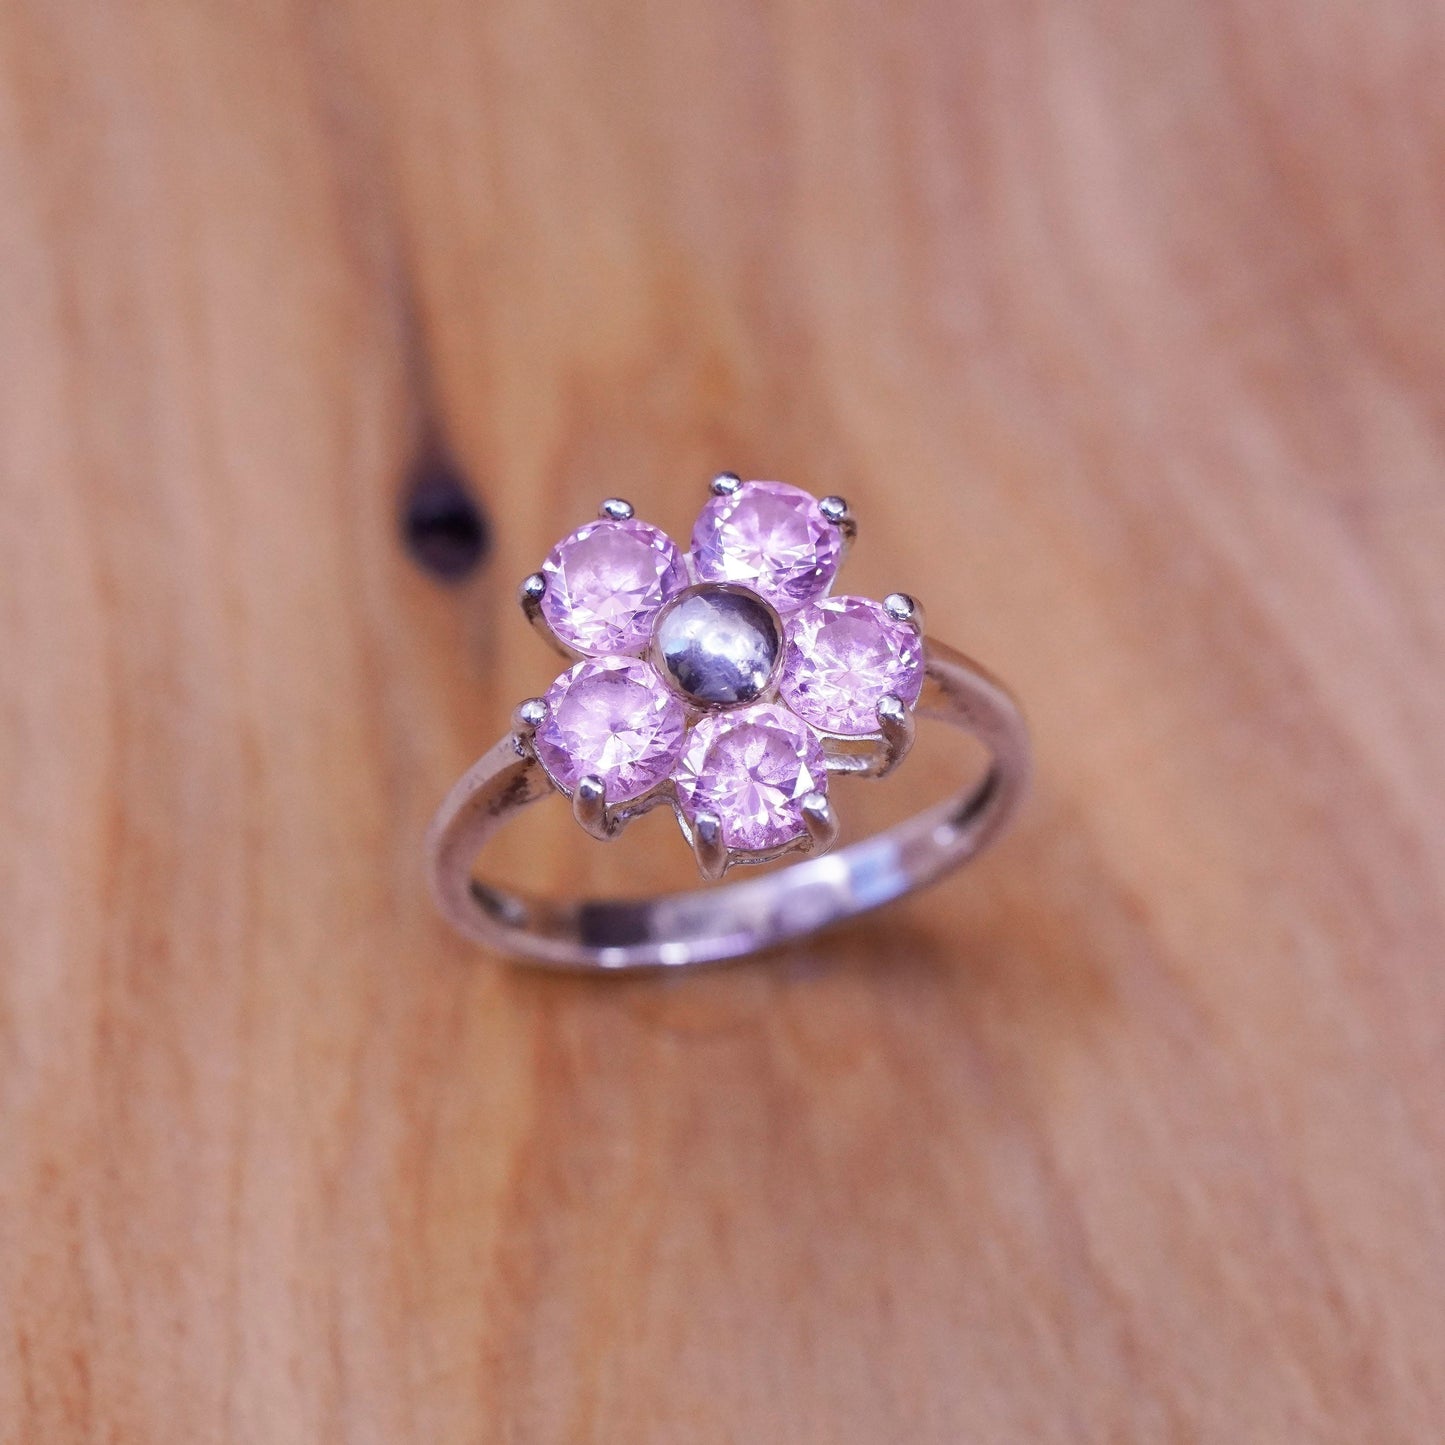 Size 8.25, vintage Sterling 925 silver handmade ring with pink cz flower